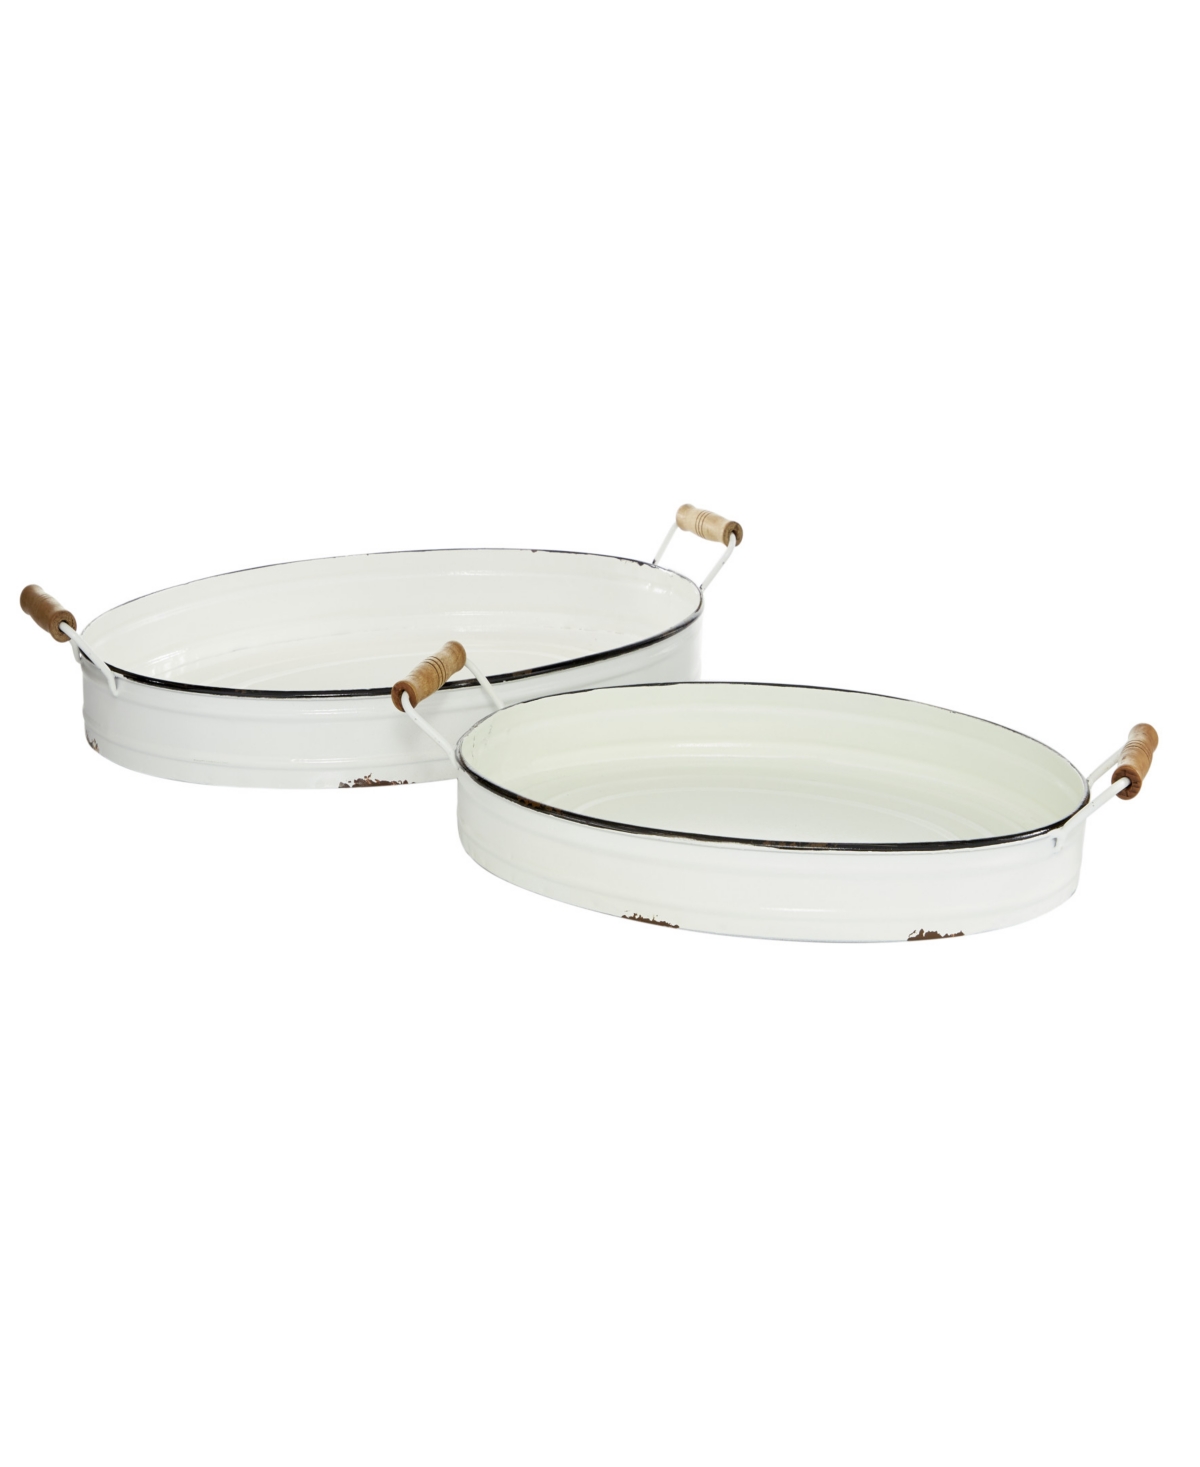 Rosemary Lane Metal Tray With Wood Handles, Set Of 2, 21", 18" W In White